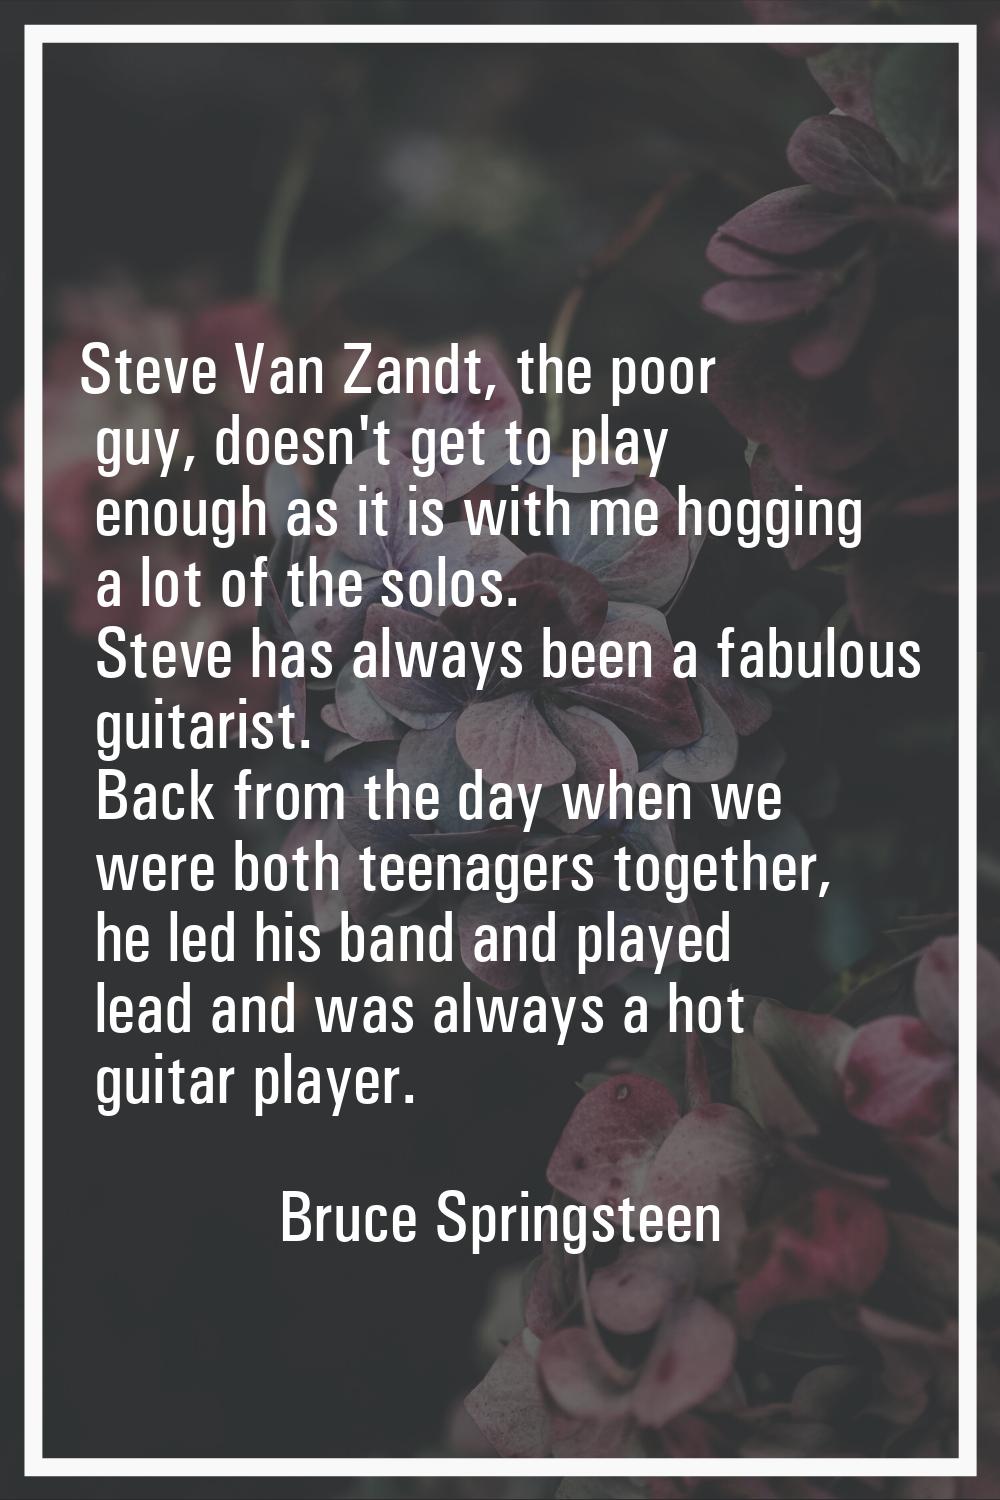 Steve Van Zandt, the poor guy, doesn't get to play enough as it is with me hogging a lot of the sol